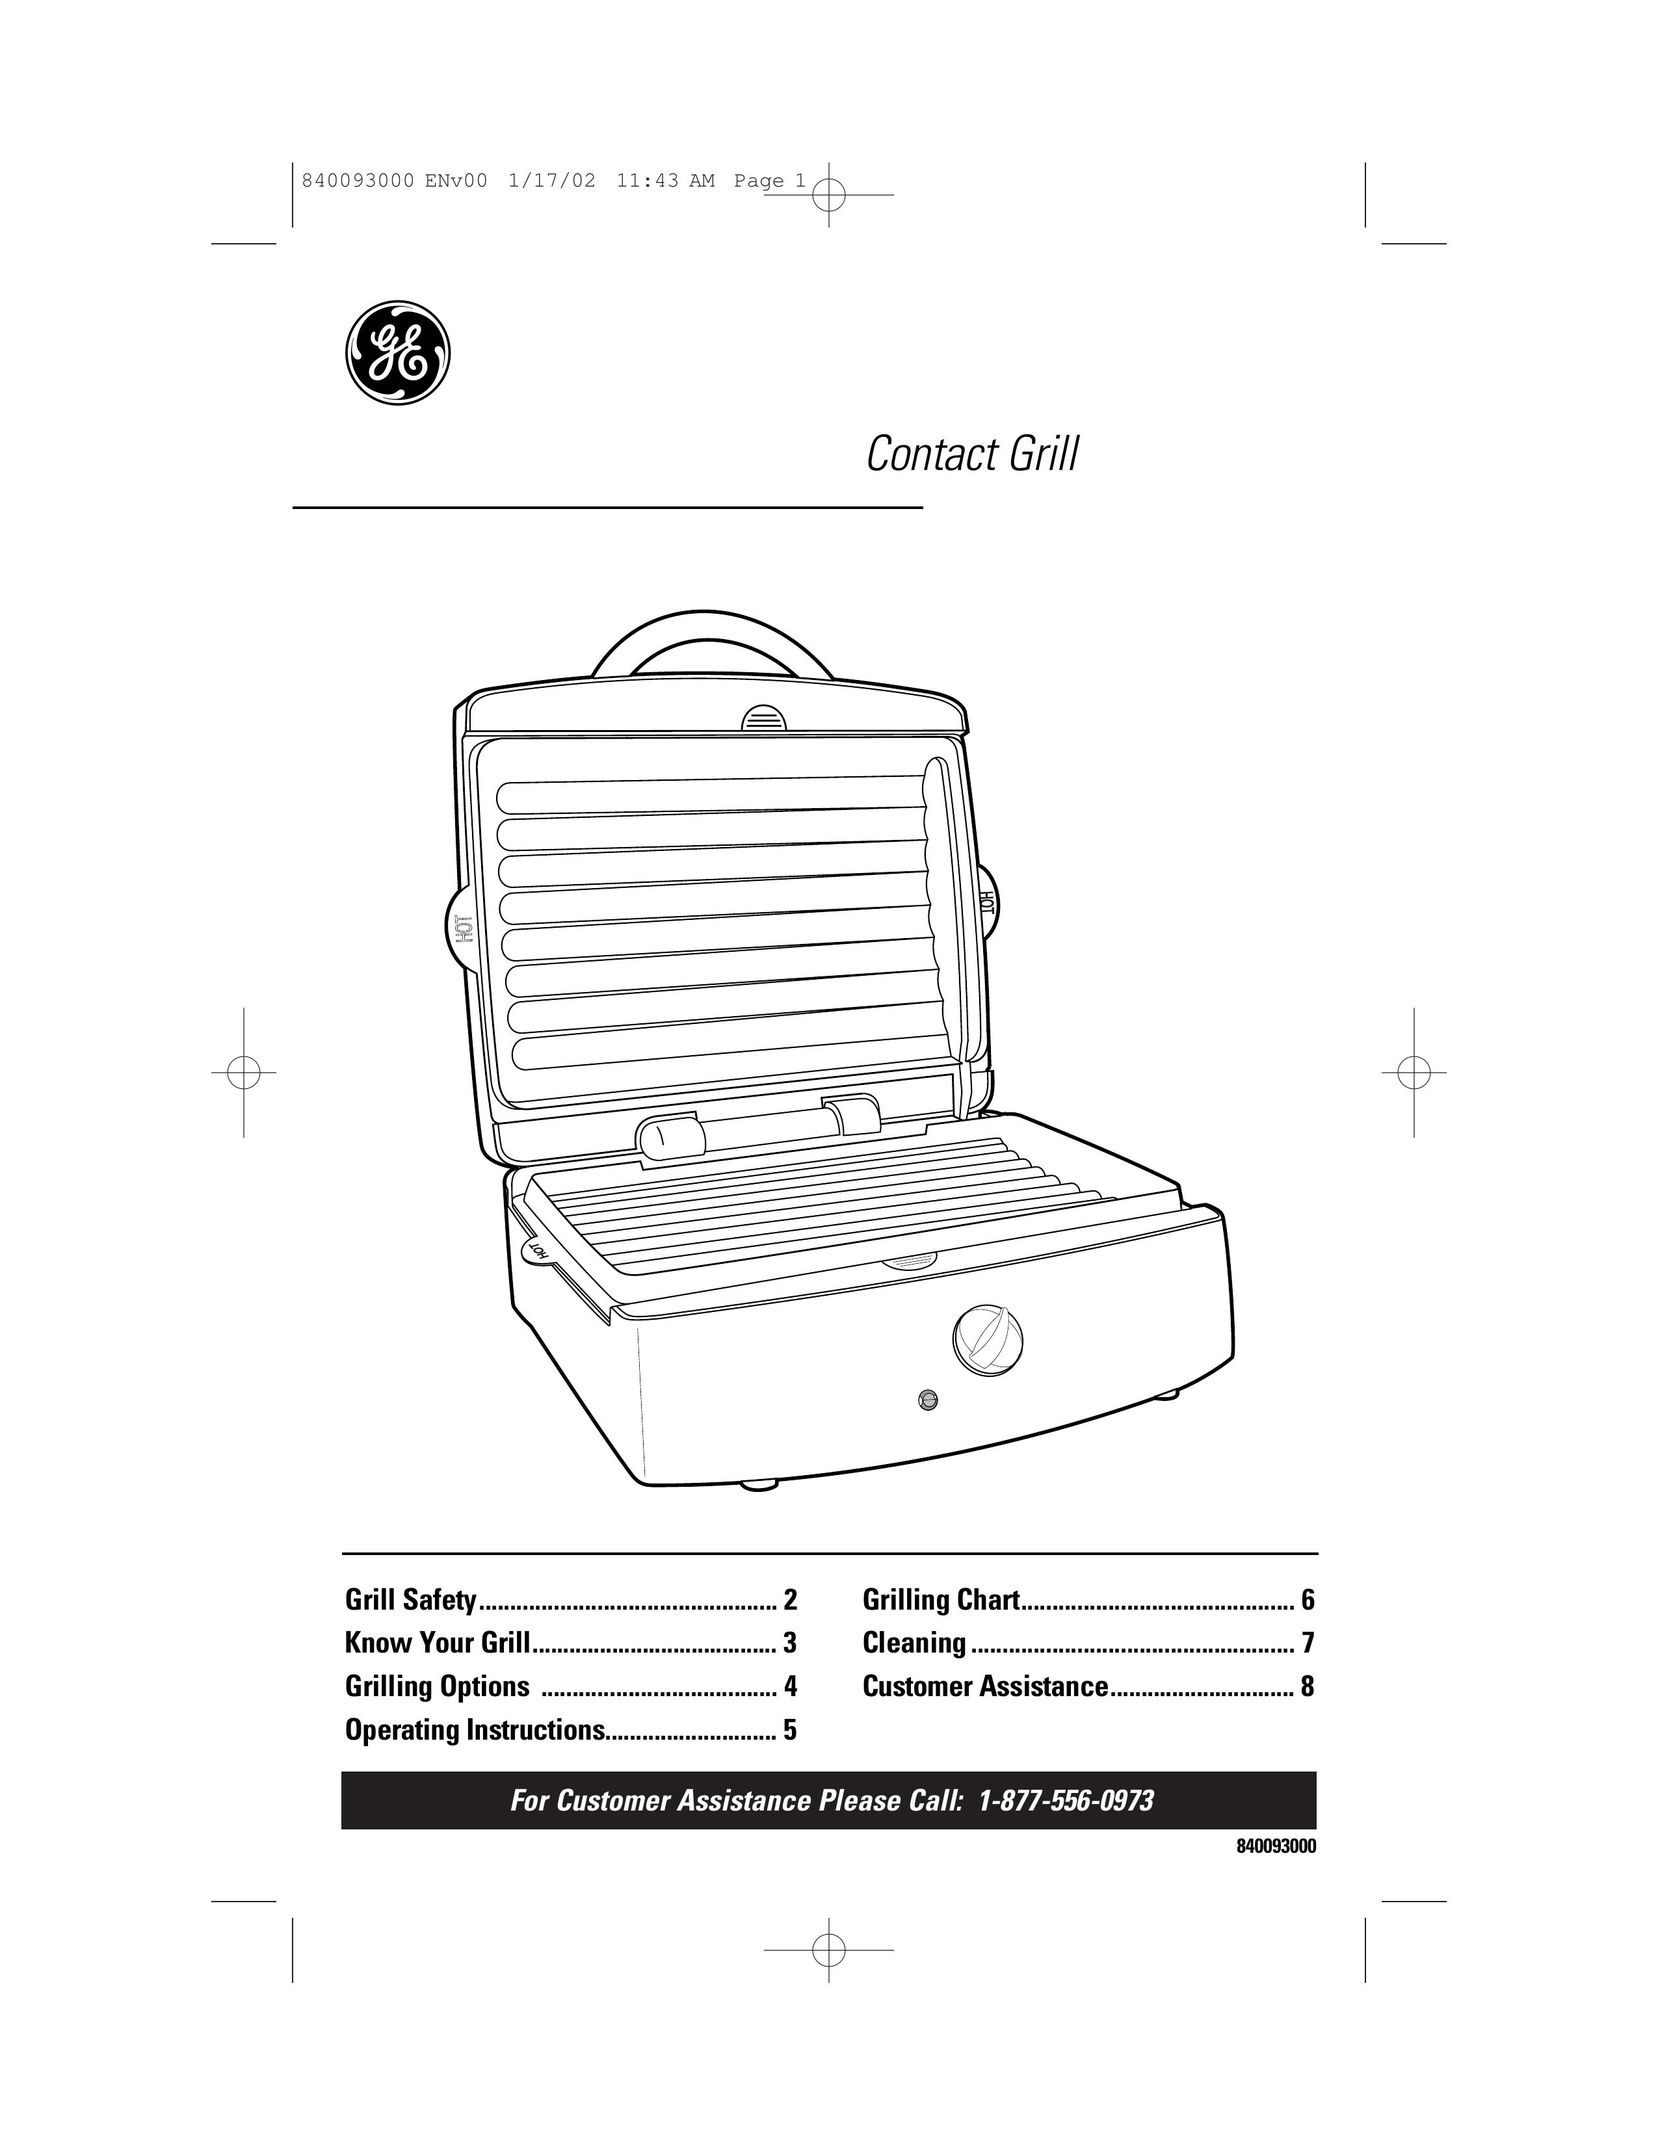 GE 840093000 Kitchen Grill User Manual